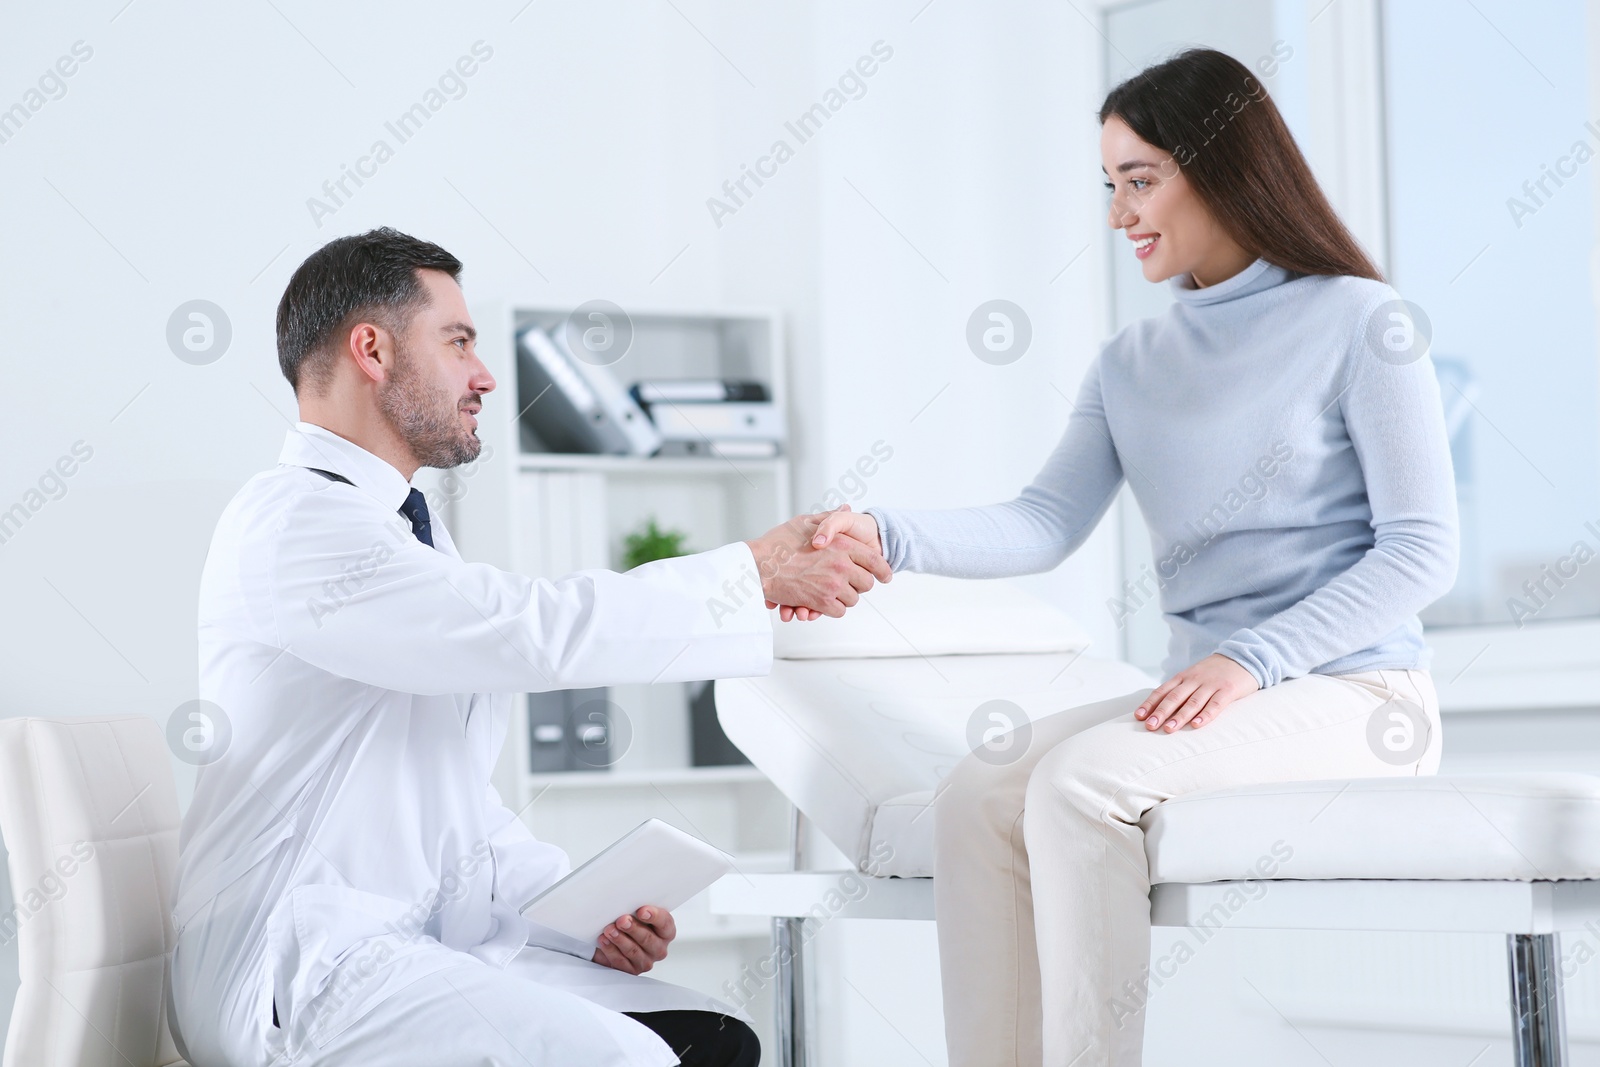 Photo of Happy doctor shaking hands with patient in hospital